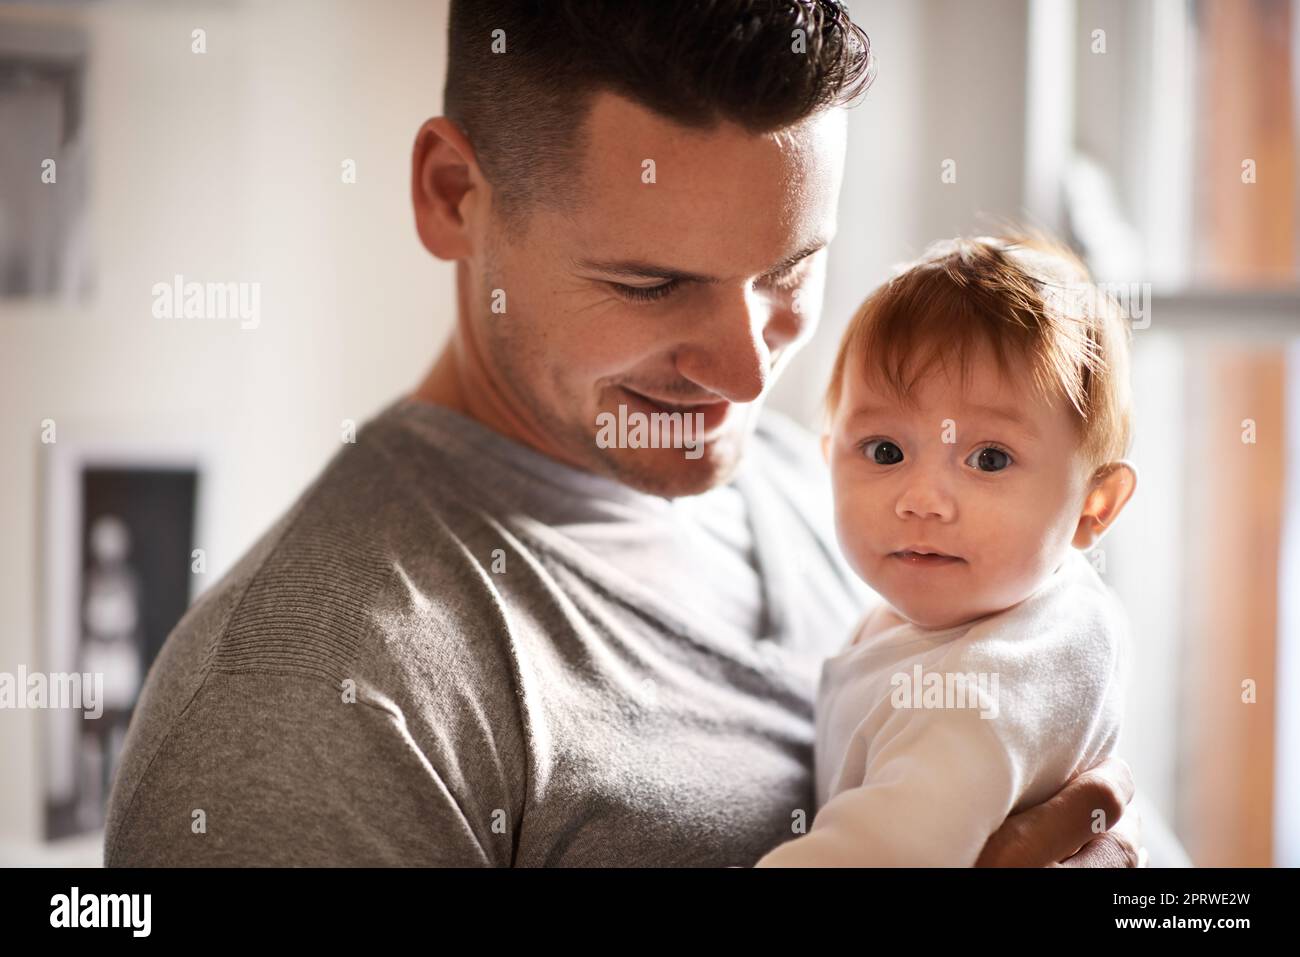 Shes my angel. Portrait of a cute baby girl being held by her father. Stock Photo